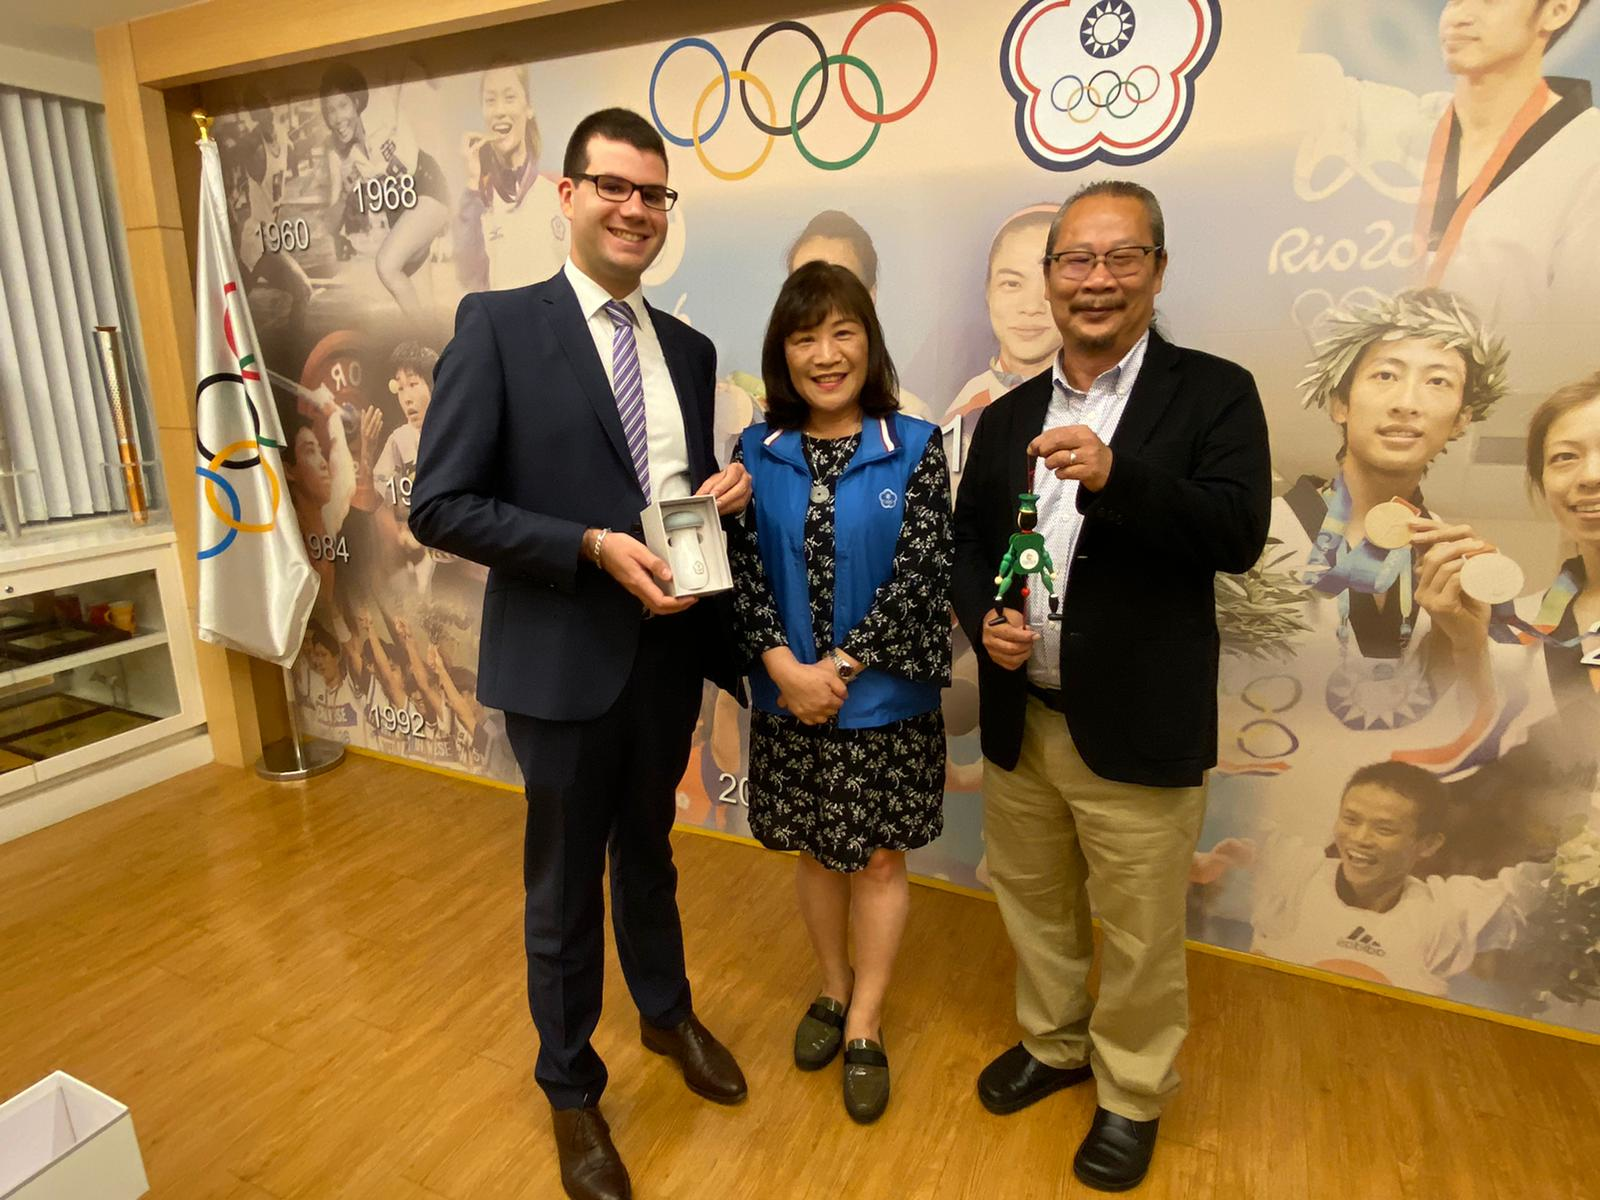 TAFISA’s Junior Director meeting with Chinese Taipei Olympic Committee’s Secretary General Frances Yuh-Fang Wang Lee and Advisor Hank Jwo.